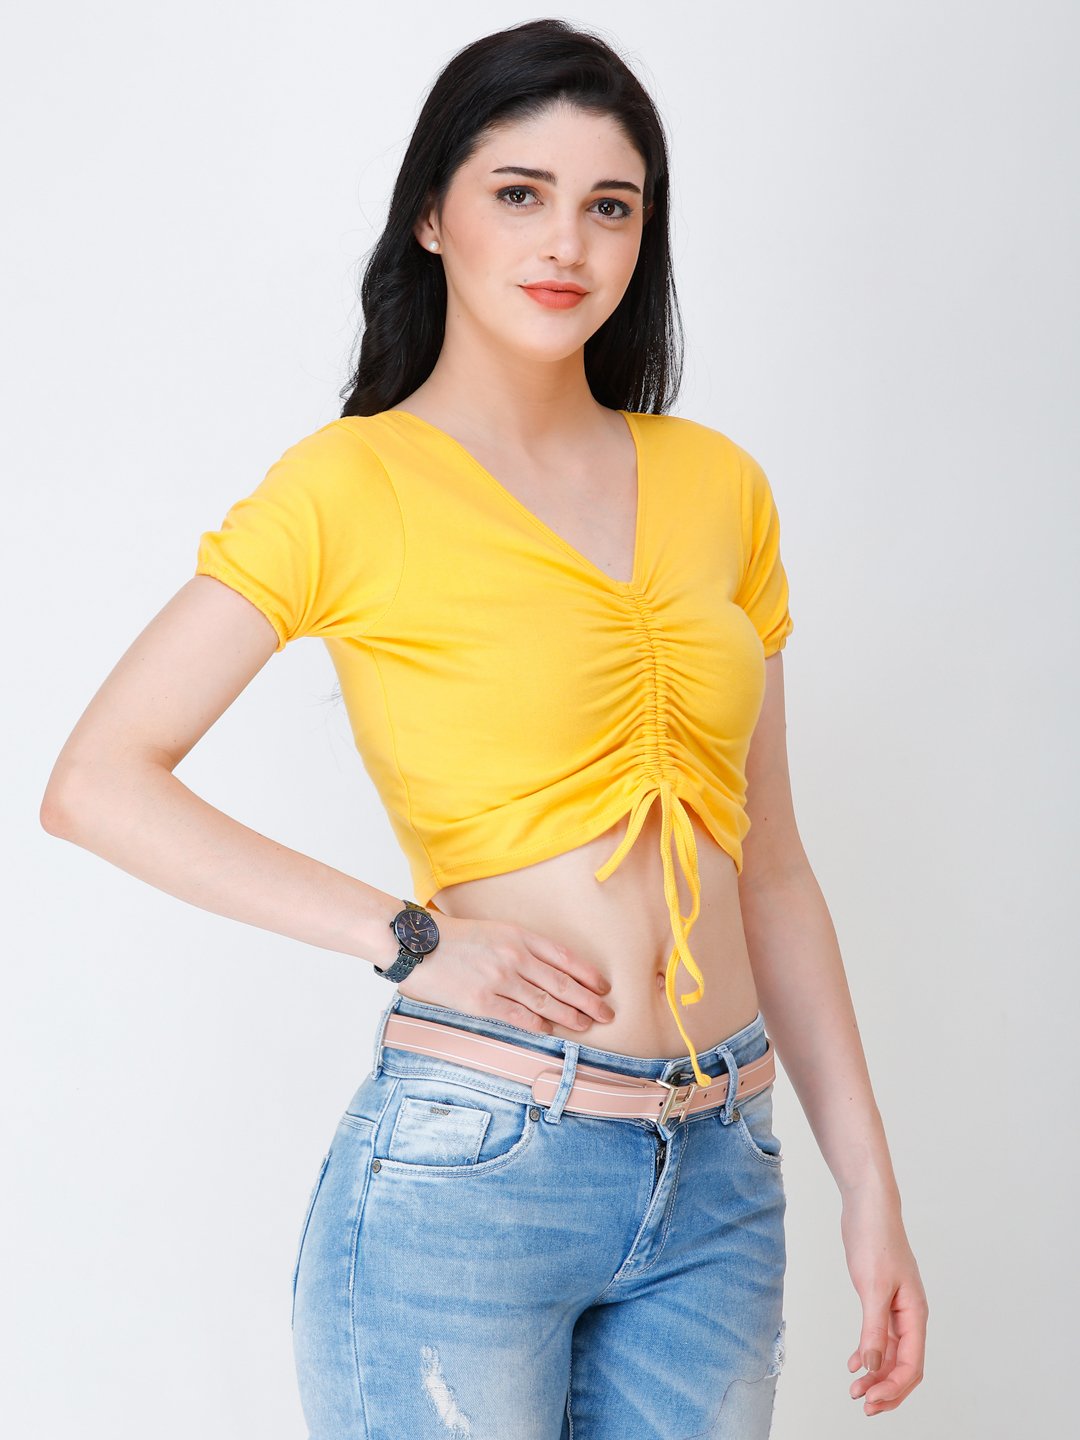 SCORPIUS yellow styled front crop top